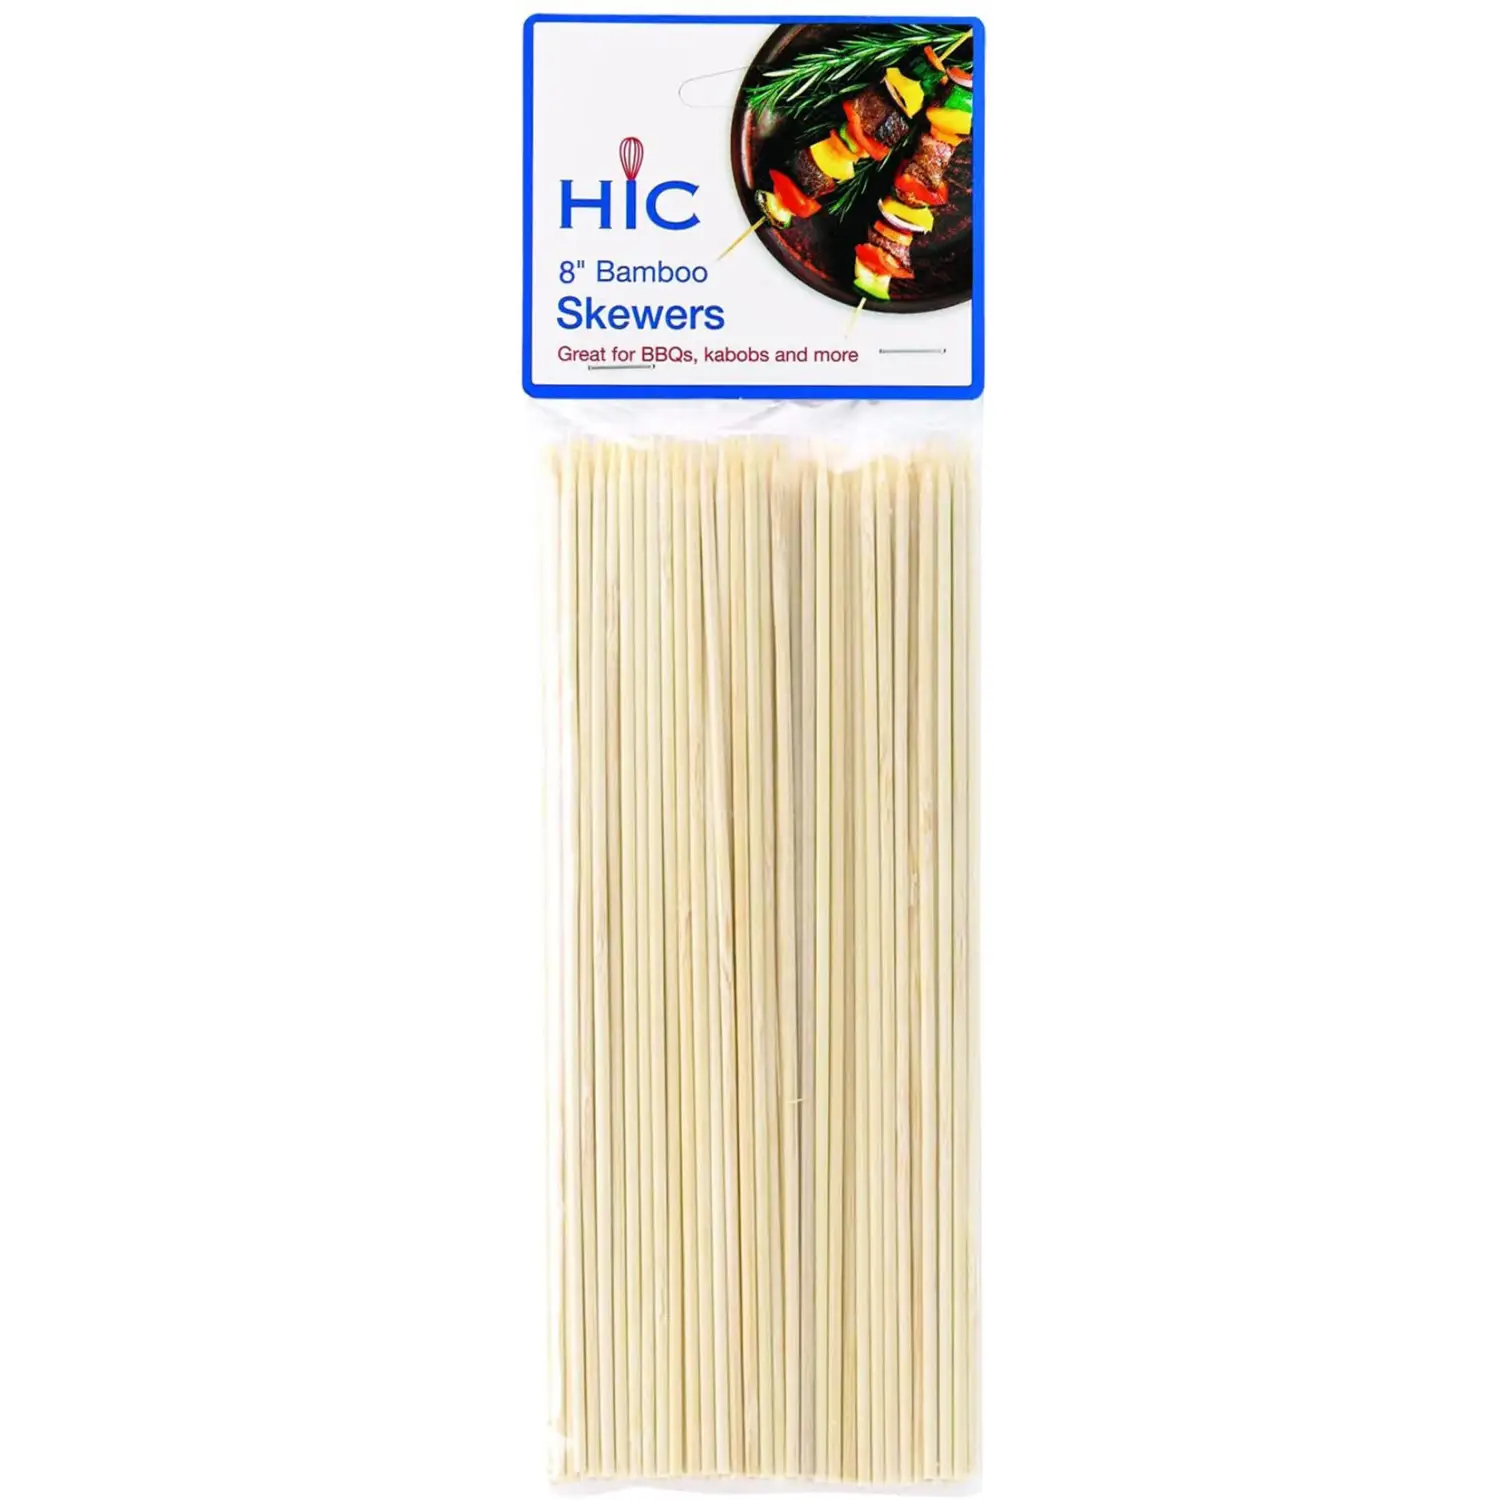 HIC Kitchen All Natural Bamboo Skewer for BBQ Grilling (8in